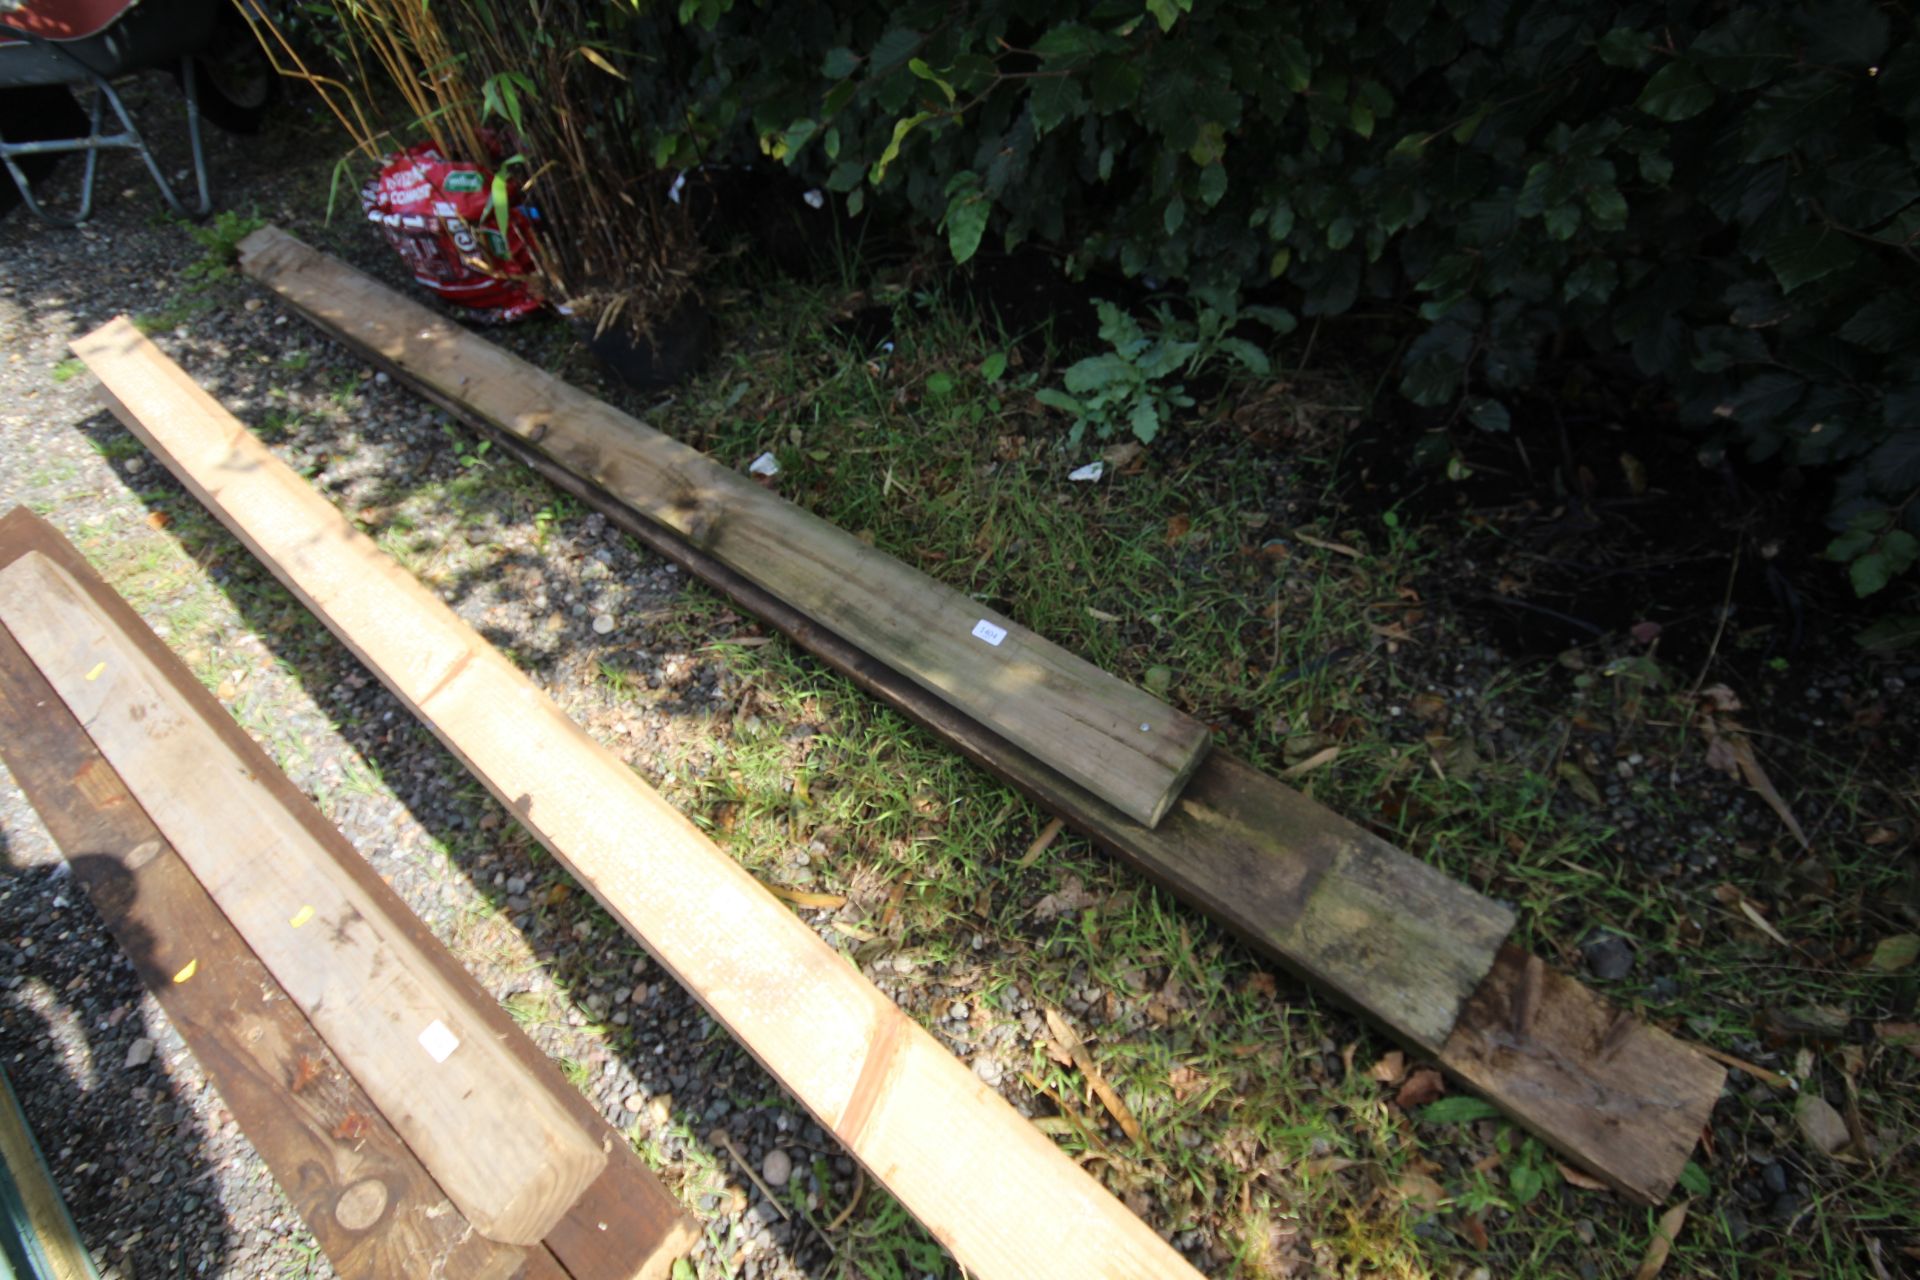 Three lengths of timber